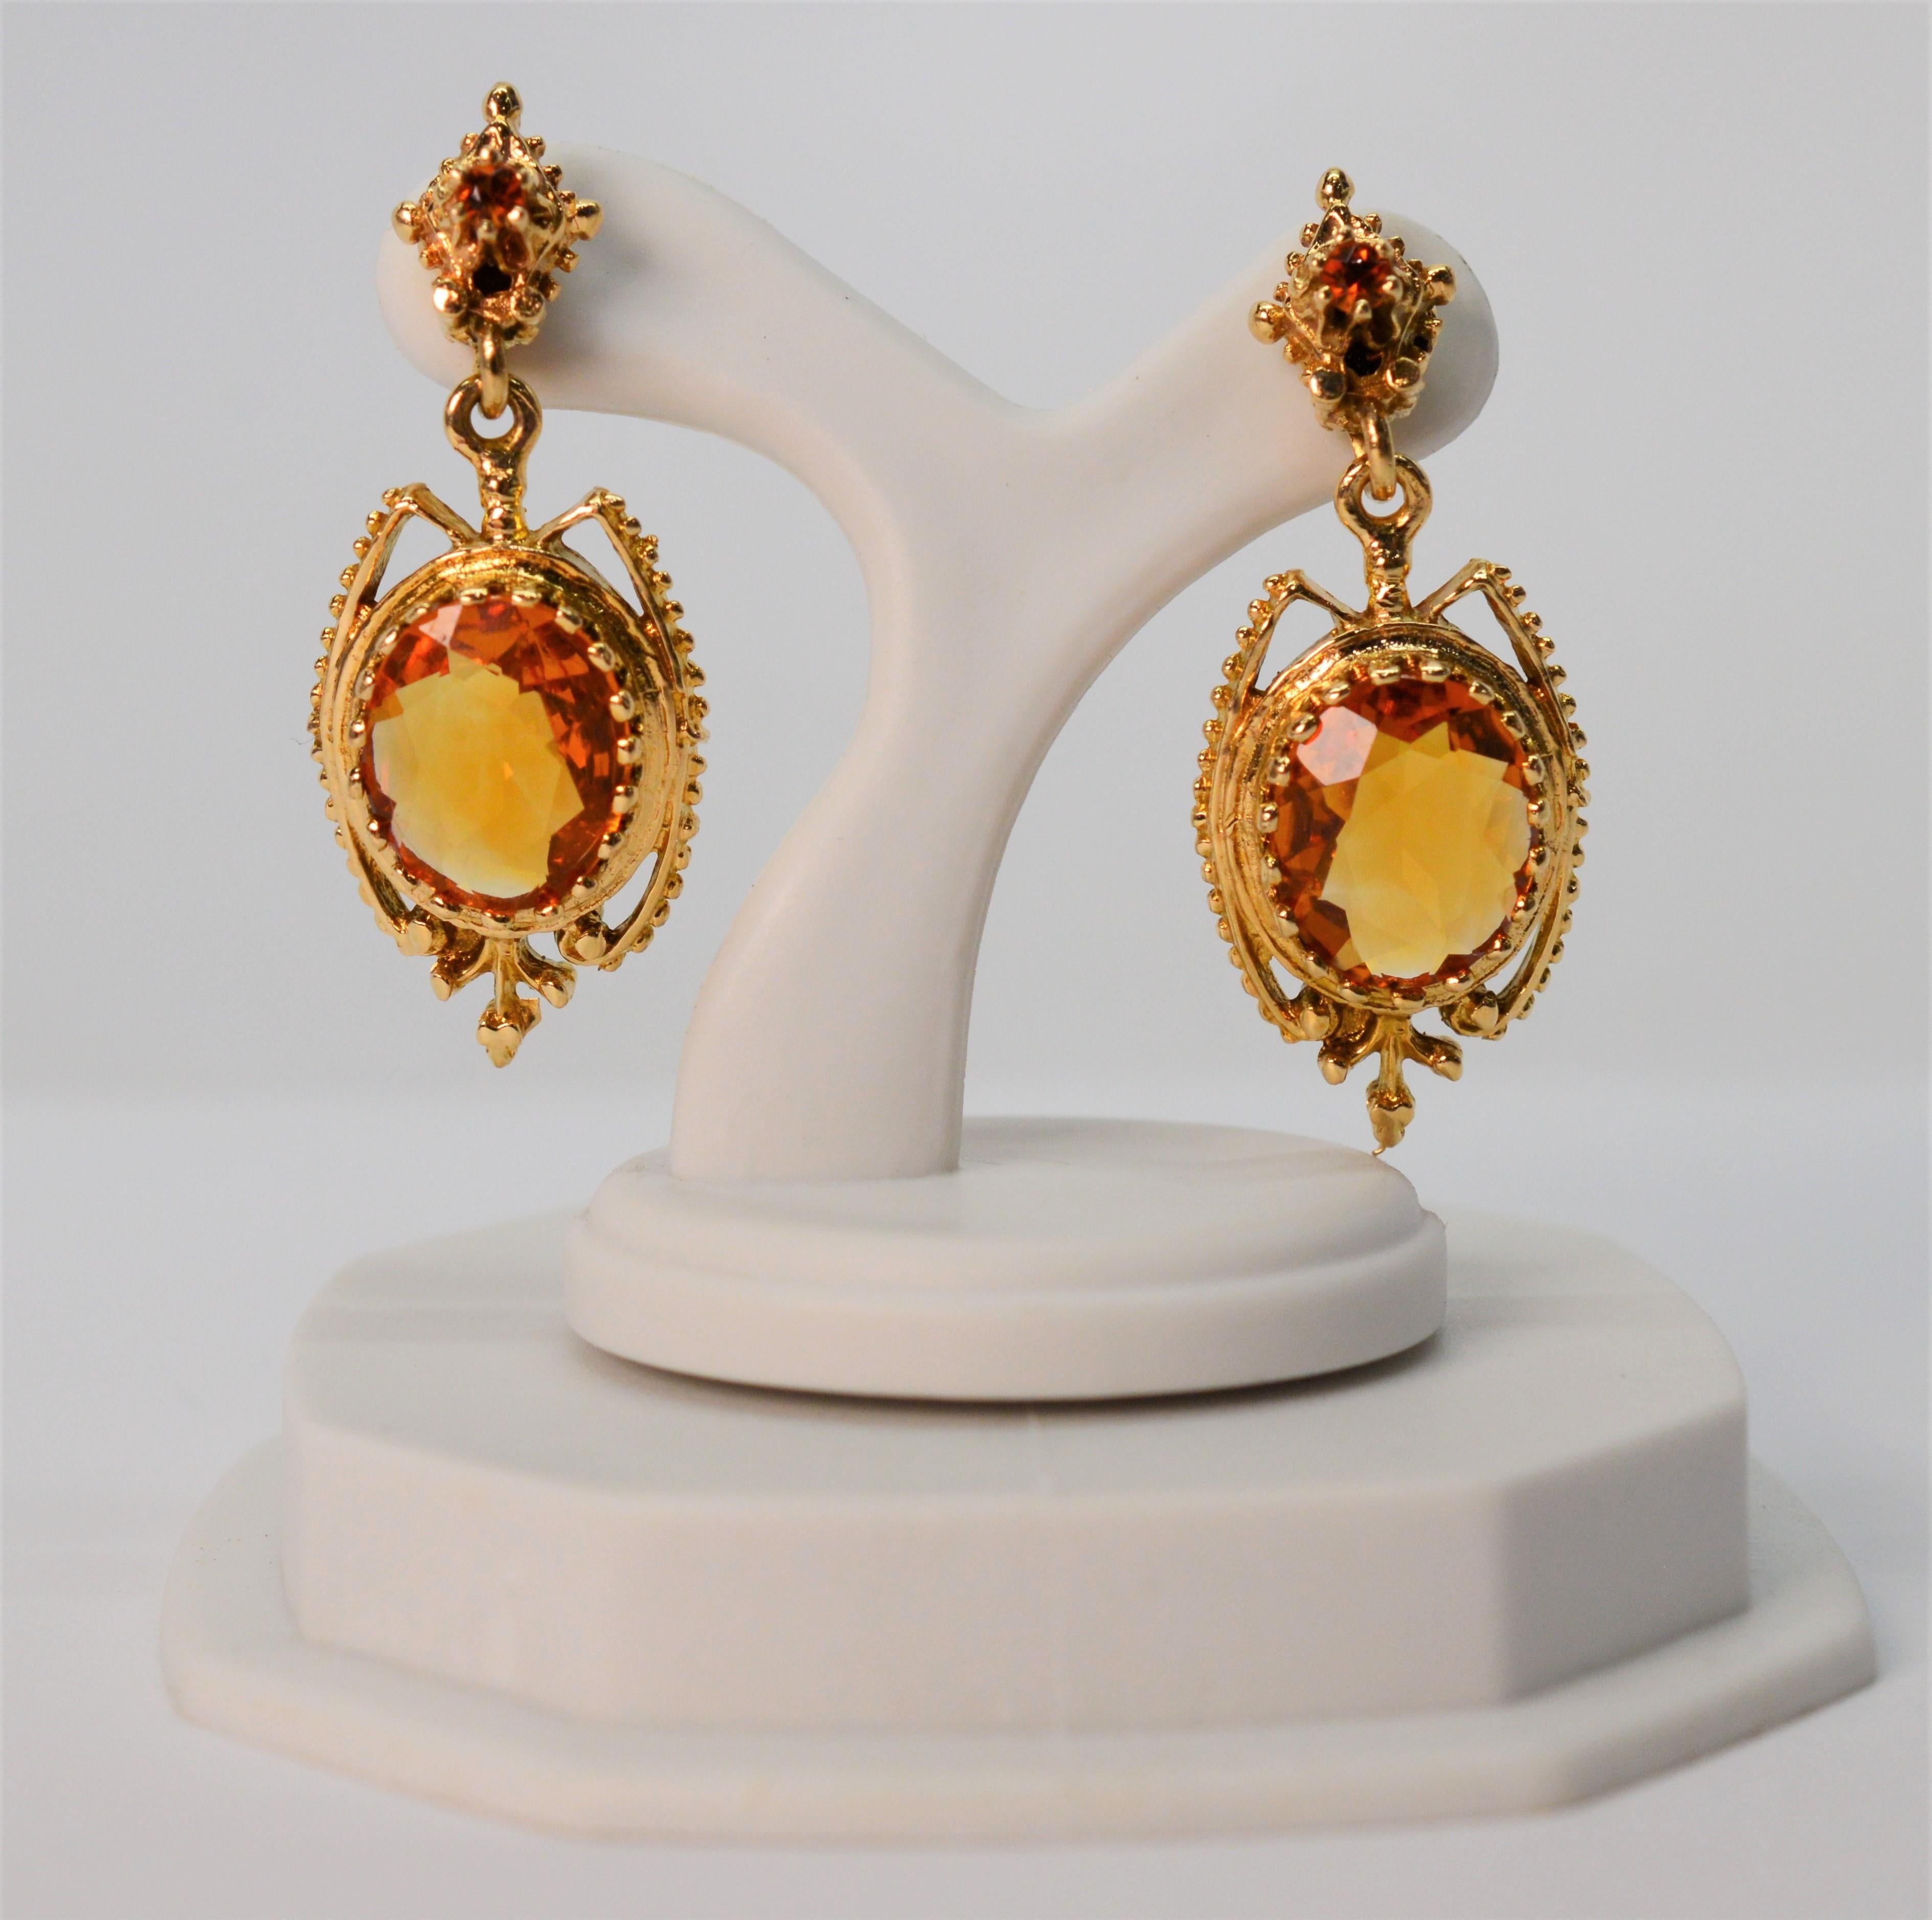 Warm honey colored citrine stones are elegantly framed in an antique style fourteen karat 14k gold setting to create these romantic drop earrings. Facet cut oval in shape, the two lovely 8x11mm gem stones have a total weight of 2.4 carats. For